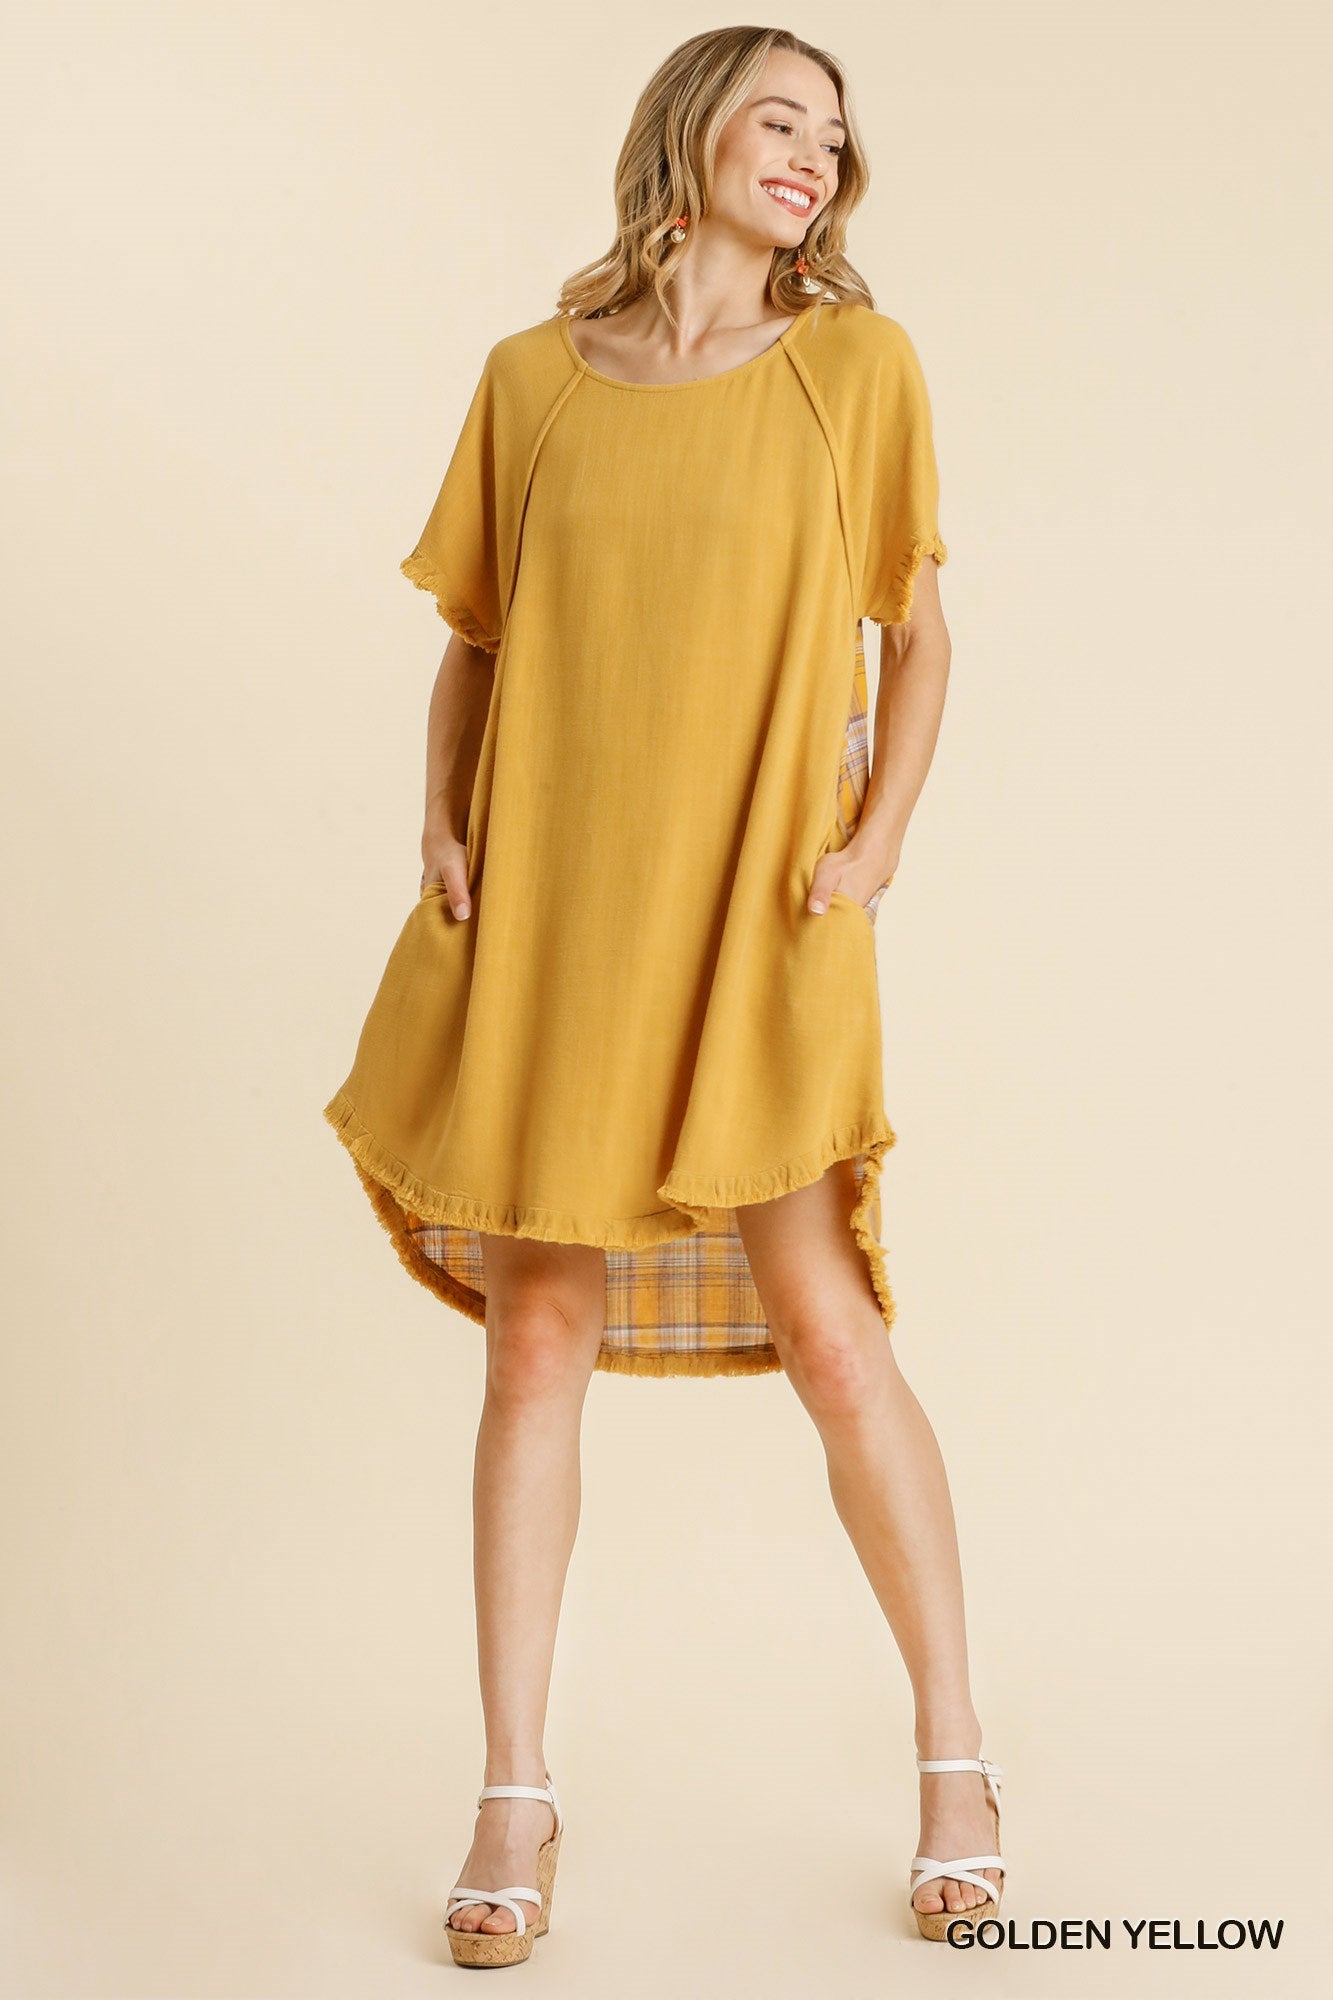 Umgee Golden Yellow Plaid Round Neck Short Sleeve Fringed Round High Low Dress - Roulhac Fashion Boutique